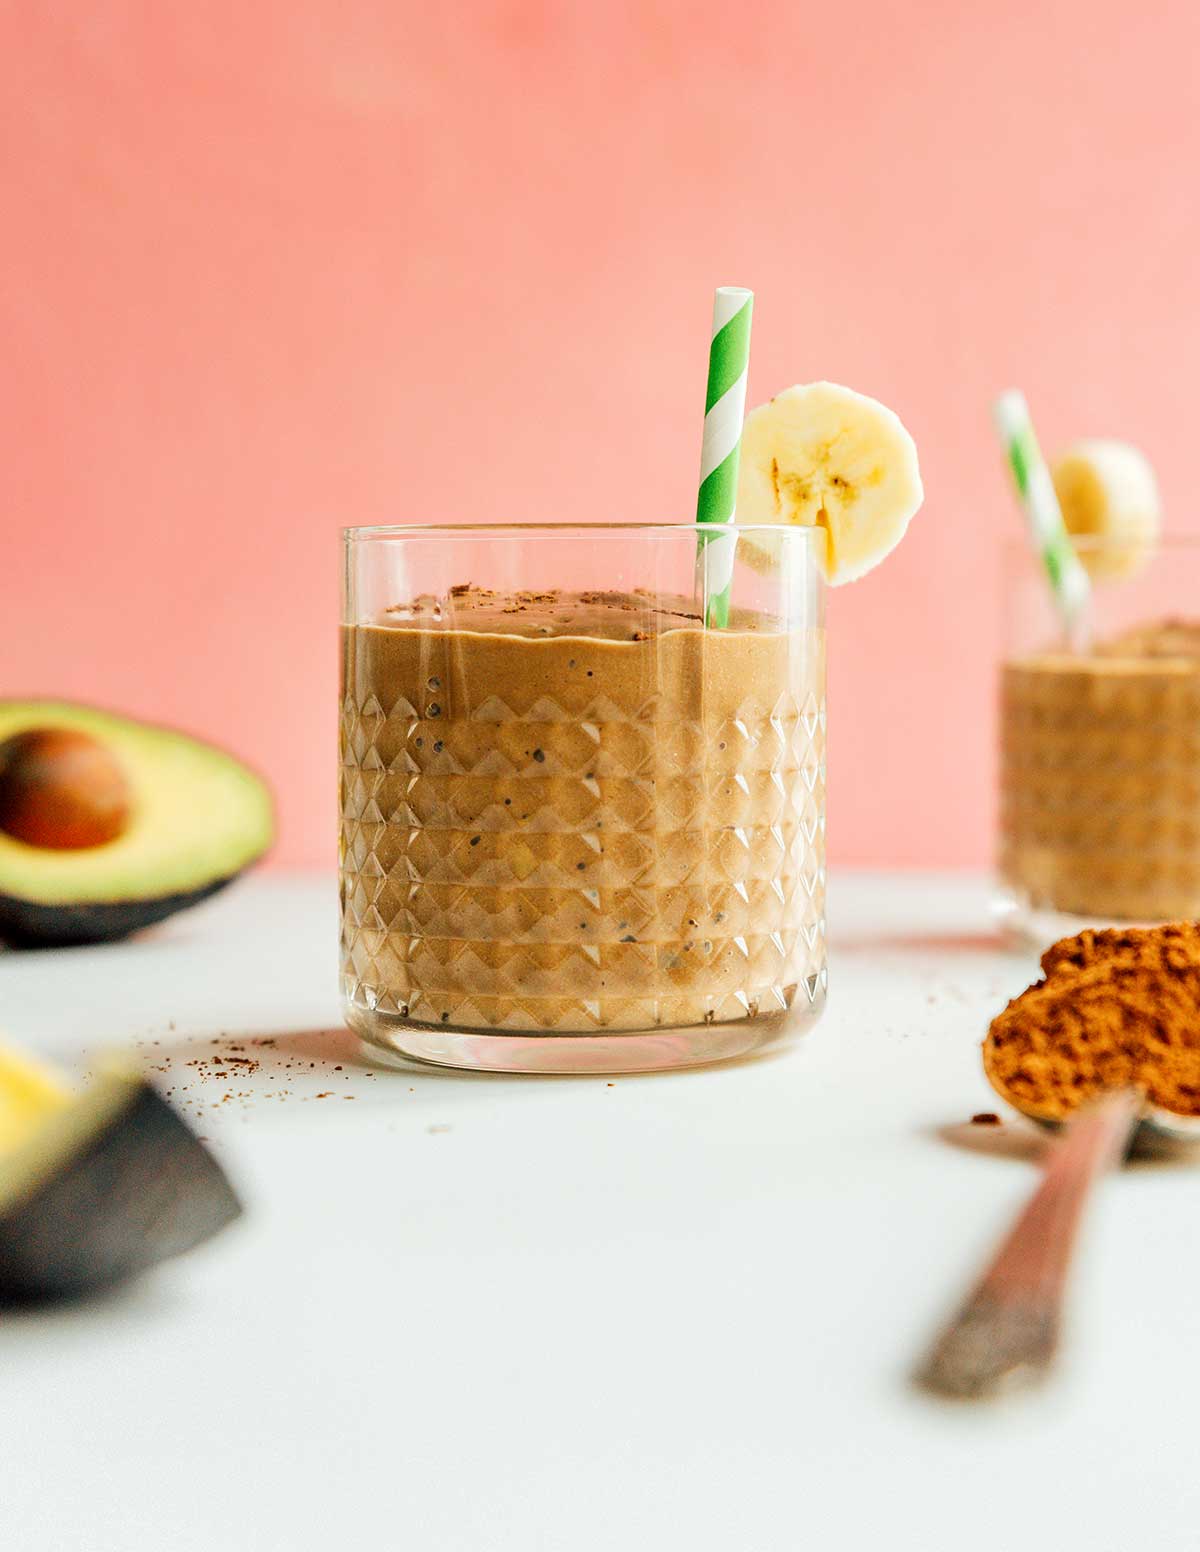 A glass filled with chocolate avocado smoothie and topped with a banana slice and a green and white striped straw